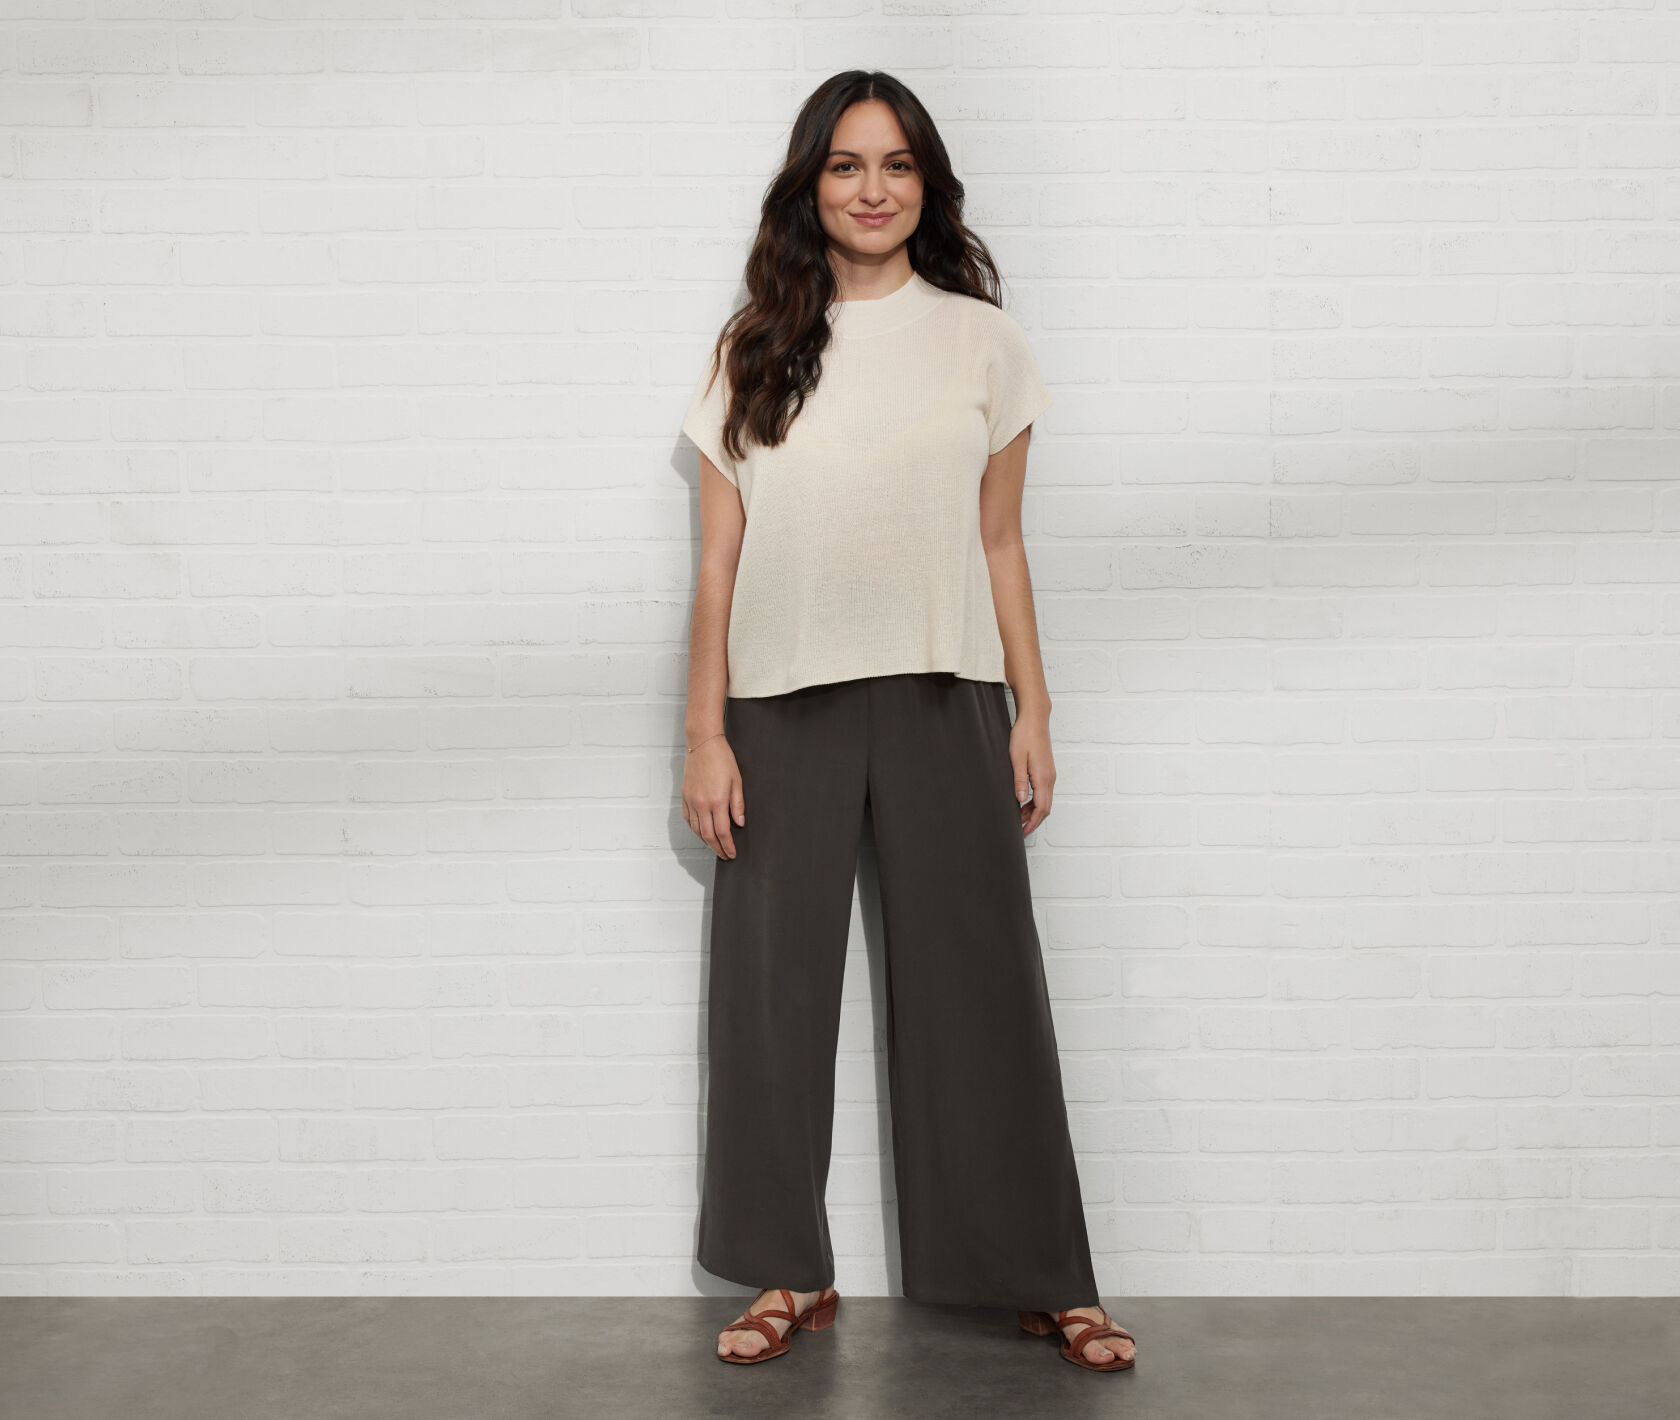 Petite woman wearing a boxy top and high-waisted pants.